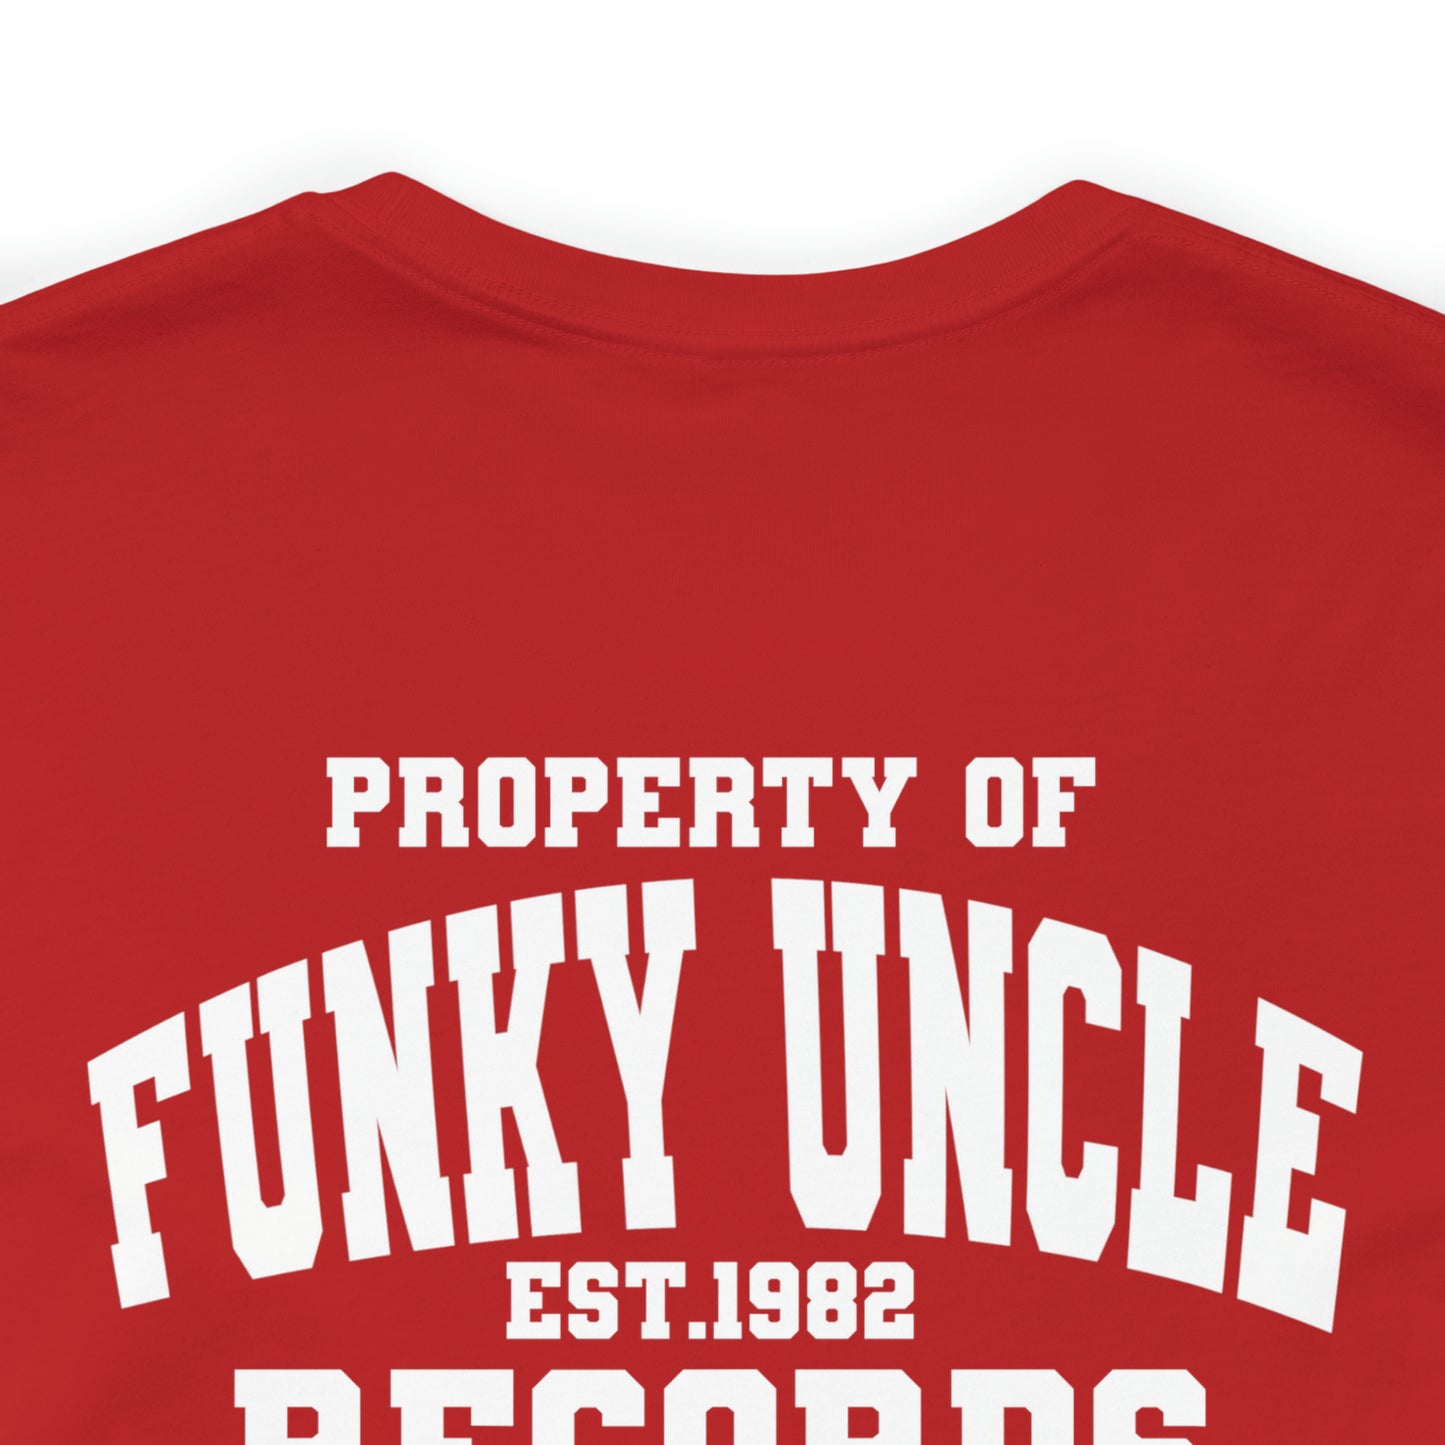 PROPERTY OF FUNKY UNCLE